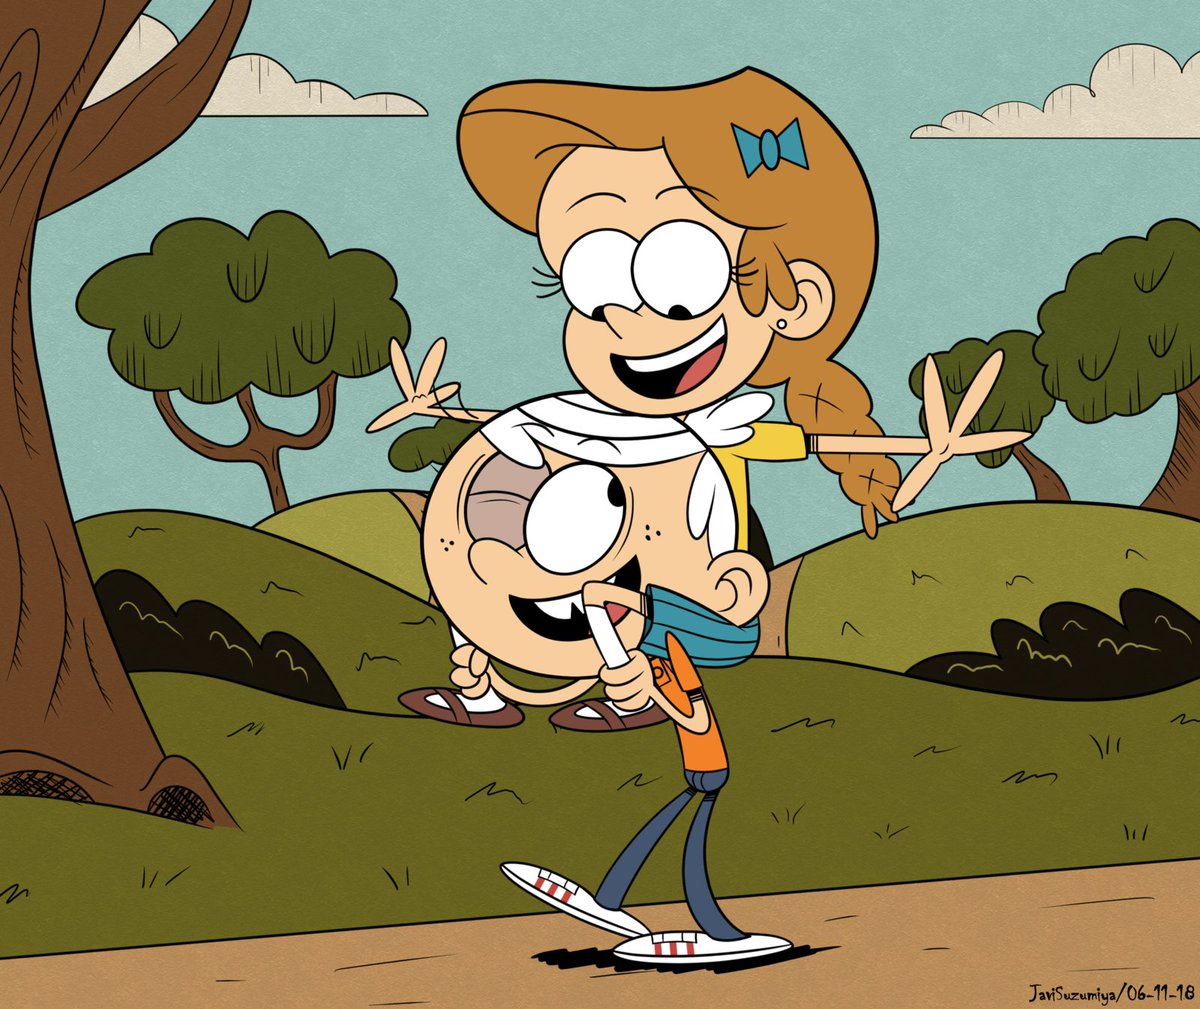 Happy 5th Anniversary to 'A Sparking Relationship'! I like how Lincoln's life changed when he met Jordan. #TheLoudHouse #LincolnLoud #GirlJordan #Jordancoln #TheLoudHouseFanfic #ASparkingRelationship #ASR @Heavy5C0MMand0 #heavy5commando #5yearsago fanfiction.net/s/13941044/1/A…